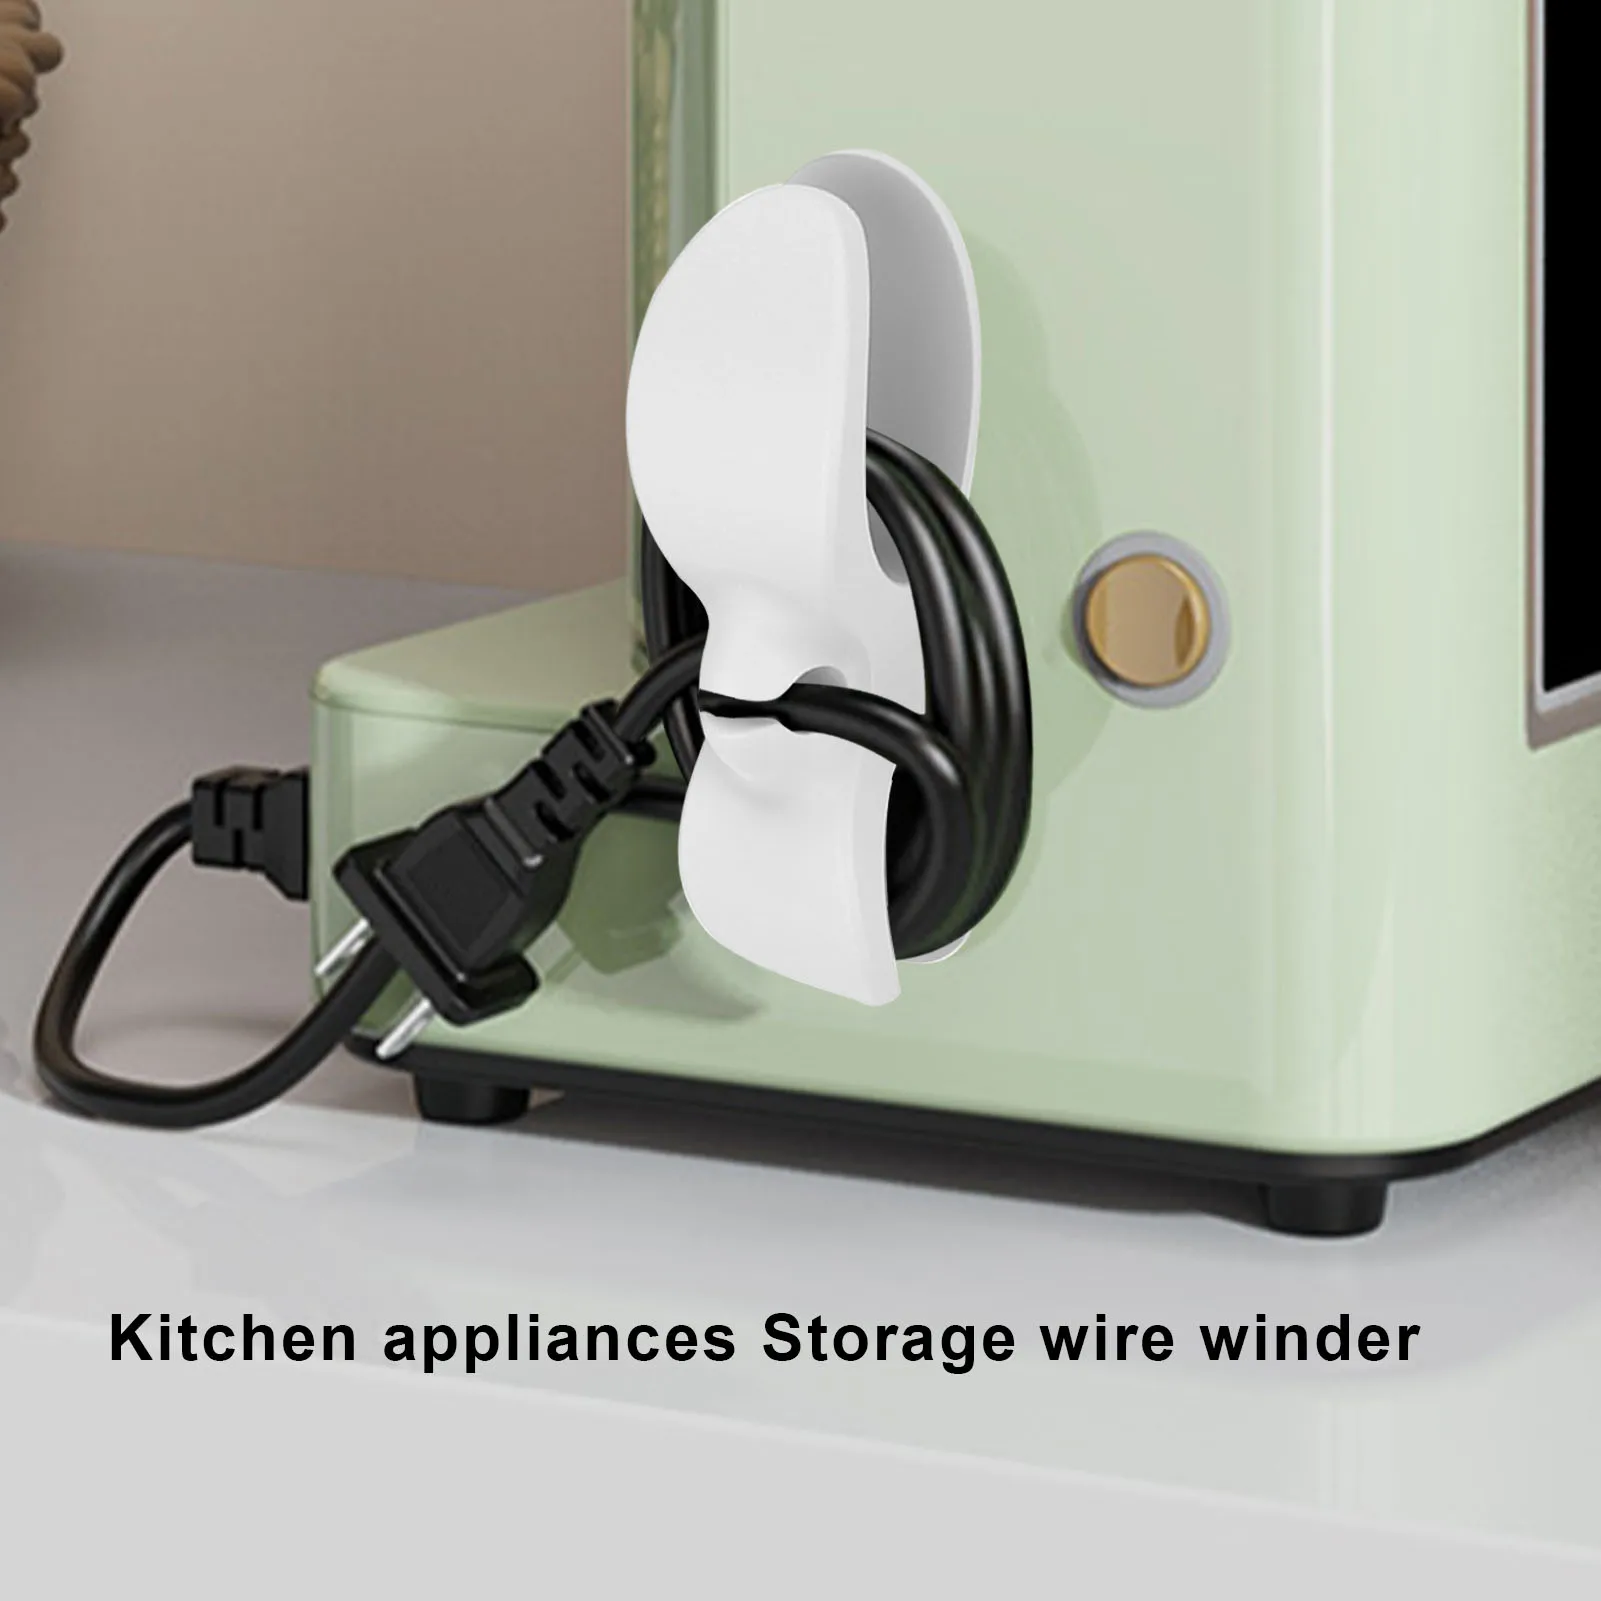 https://ae01.alicdn.com/kf/Sea61620fb80d4a619a1f6cd795e2a074H/Cord-Winder-Organizer-for-Kitchen-Appliances-Cord-Wrapper-Cable-Management-Clips-Holder-for-Household-Organizing-Cable.jpg